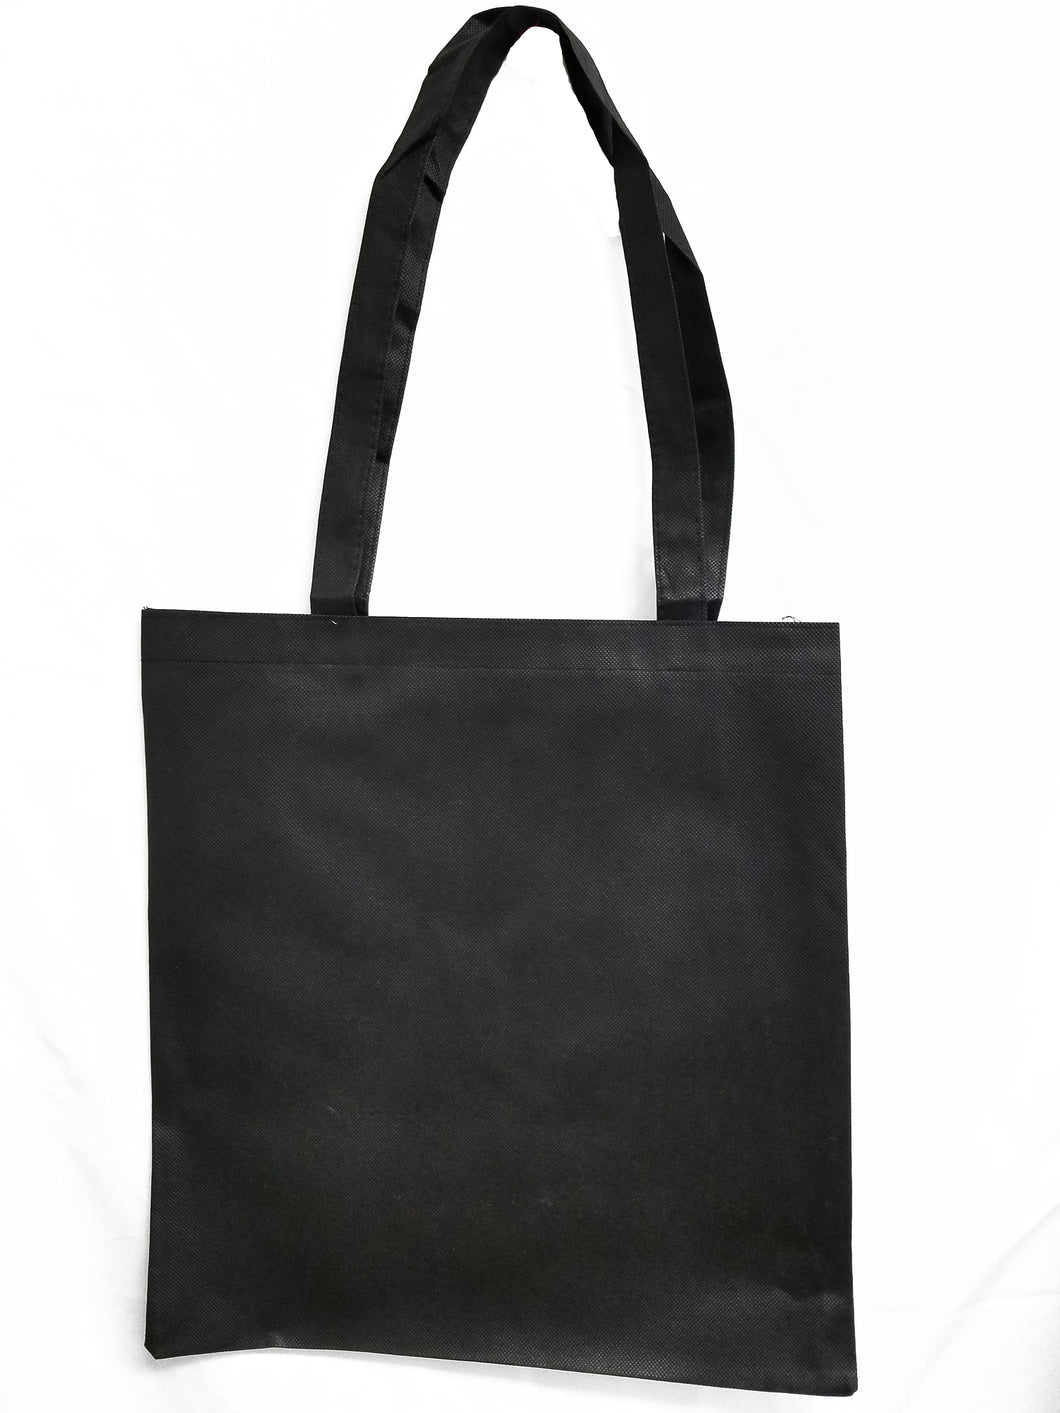 Wholesale Budget tote in Black